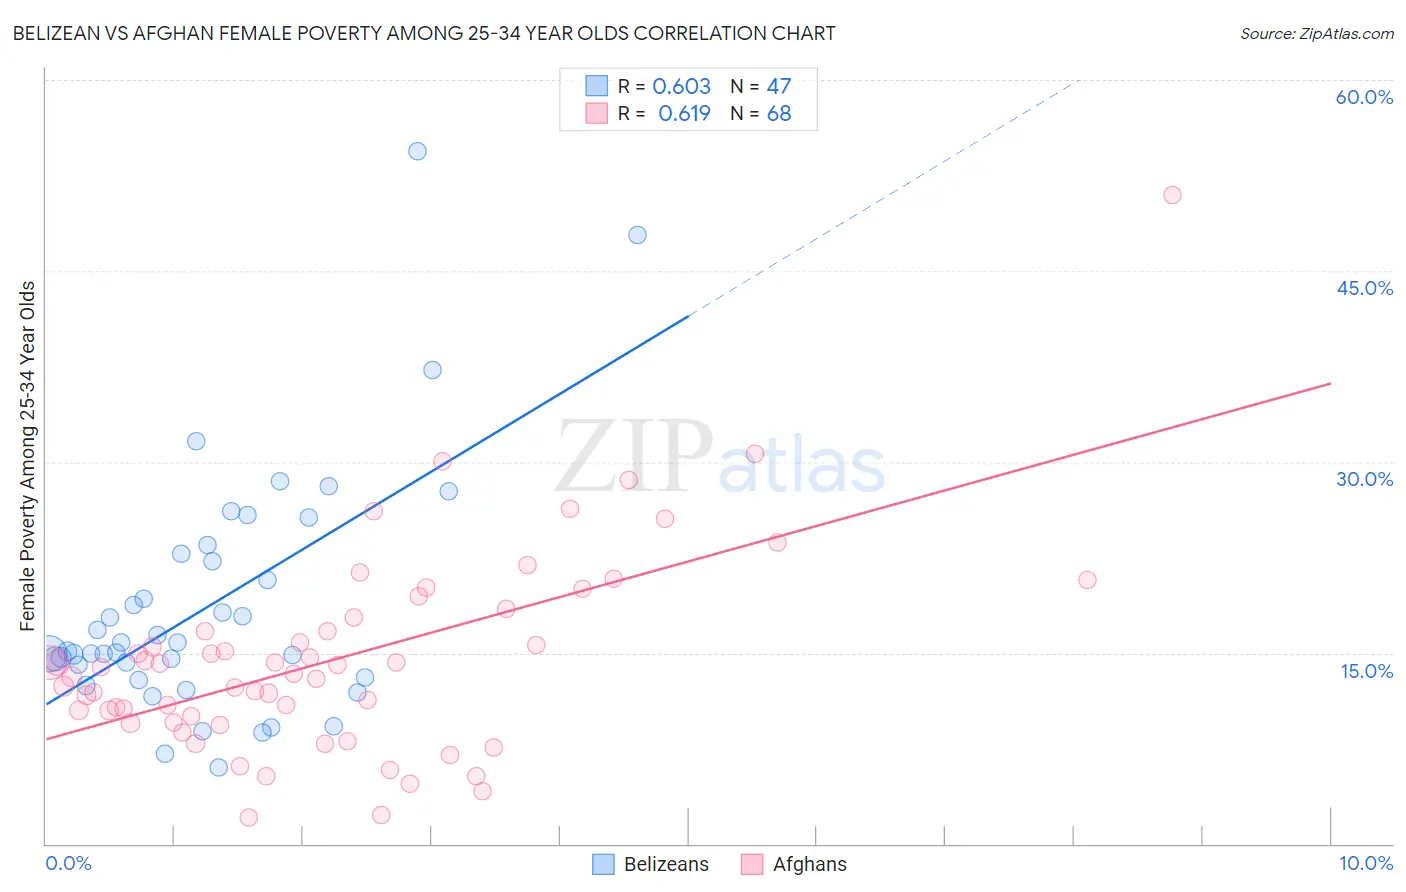 Belizean vs Afghan Female Poverty Among 25-34 Year Olds